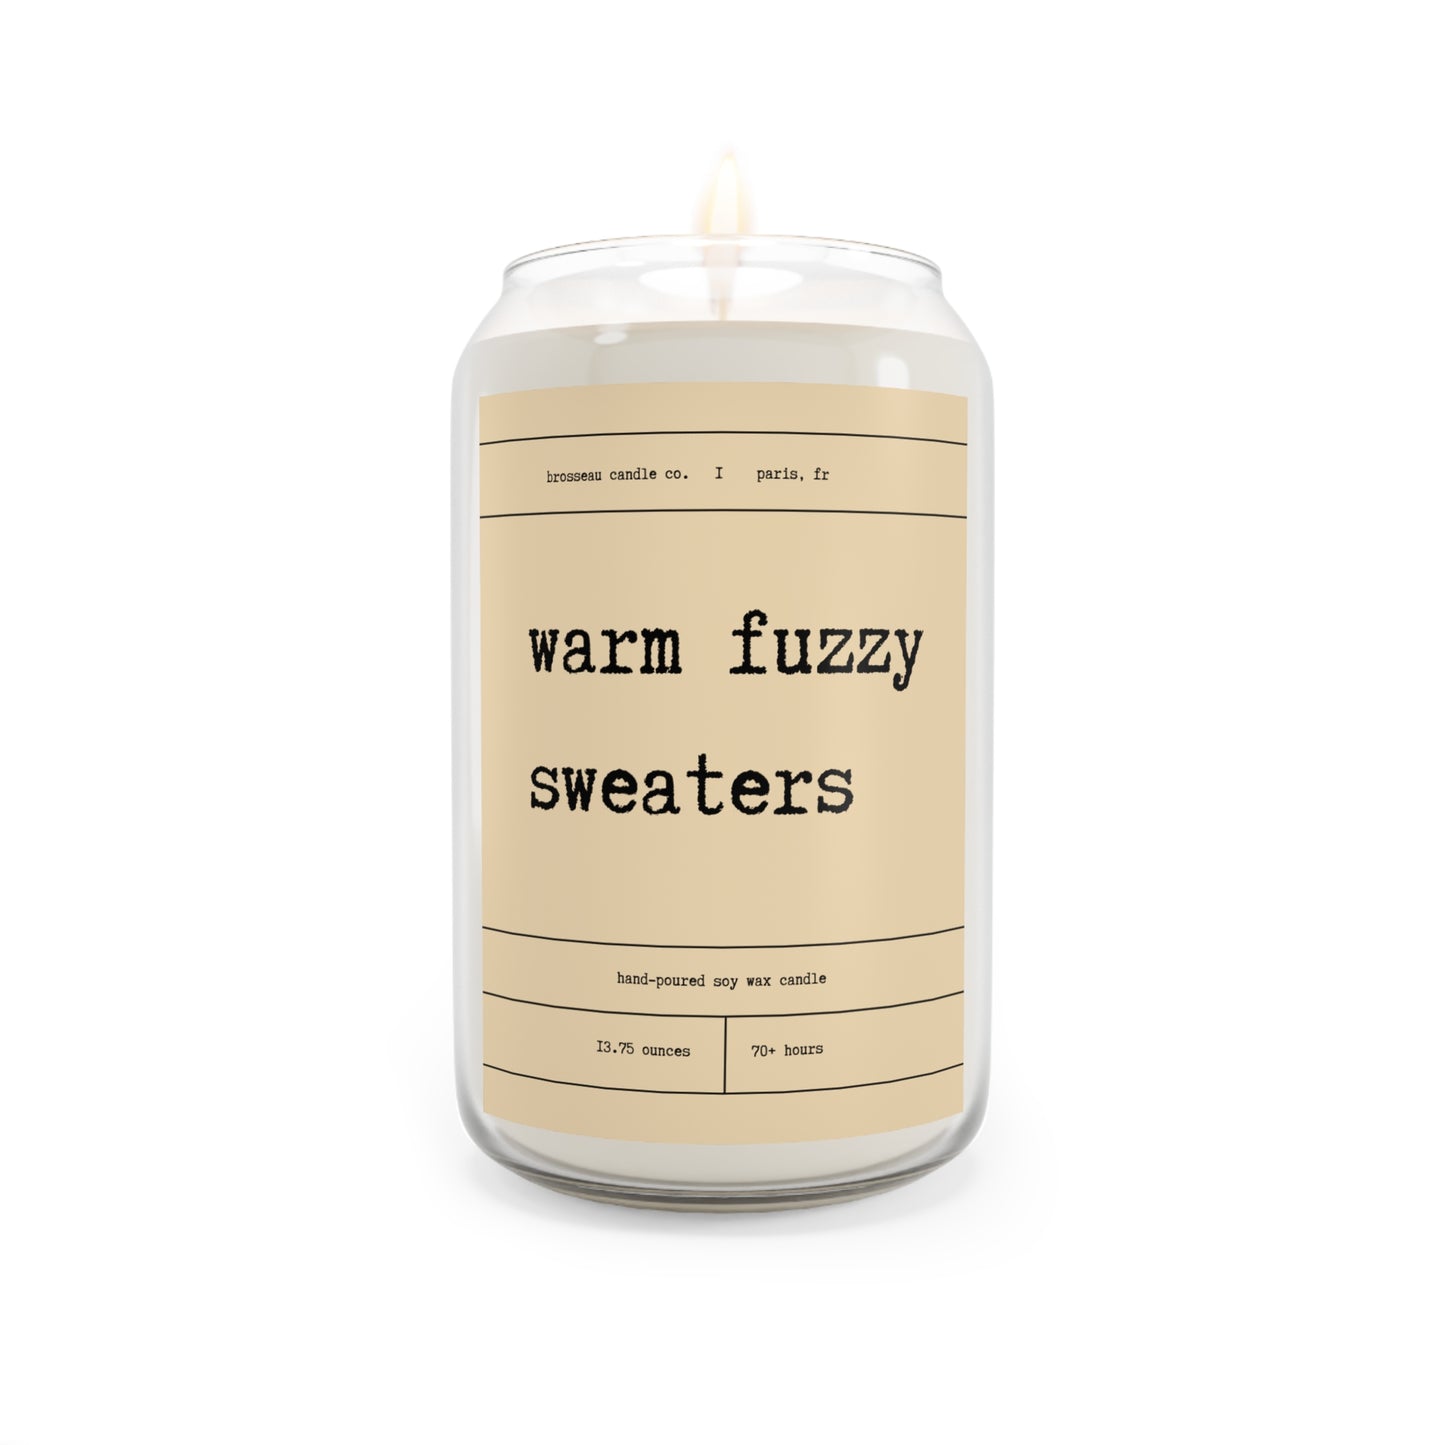 Warm fuzzy sweaters Scented Candle, Fall Candle, Autumn Candle, Soy Wax, 13.75oz